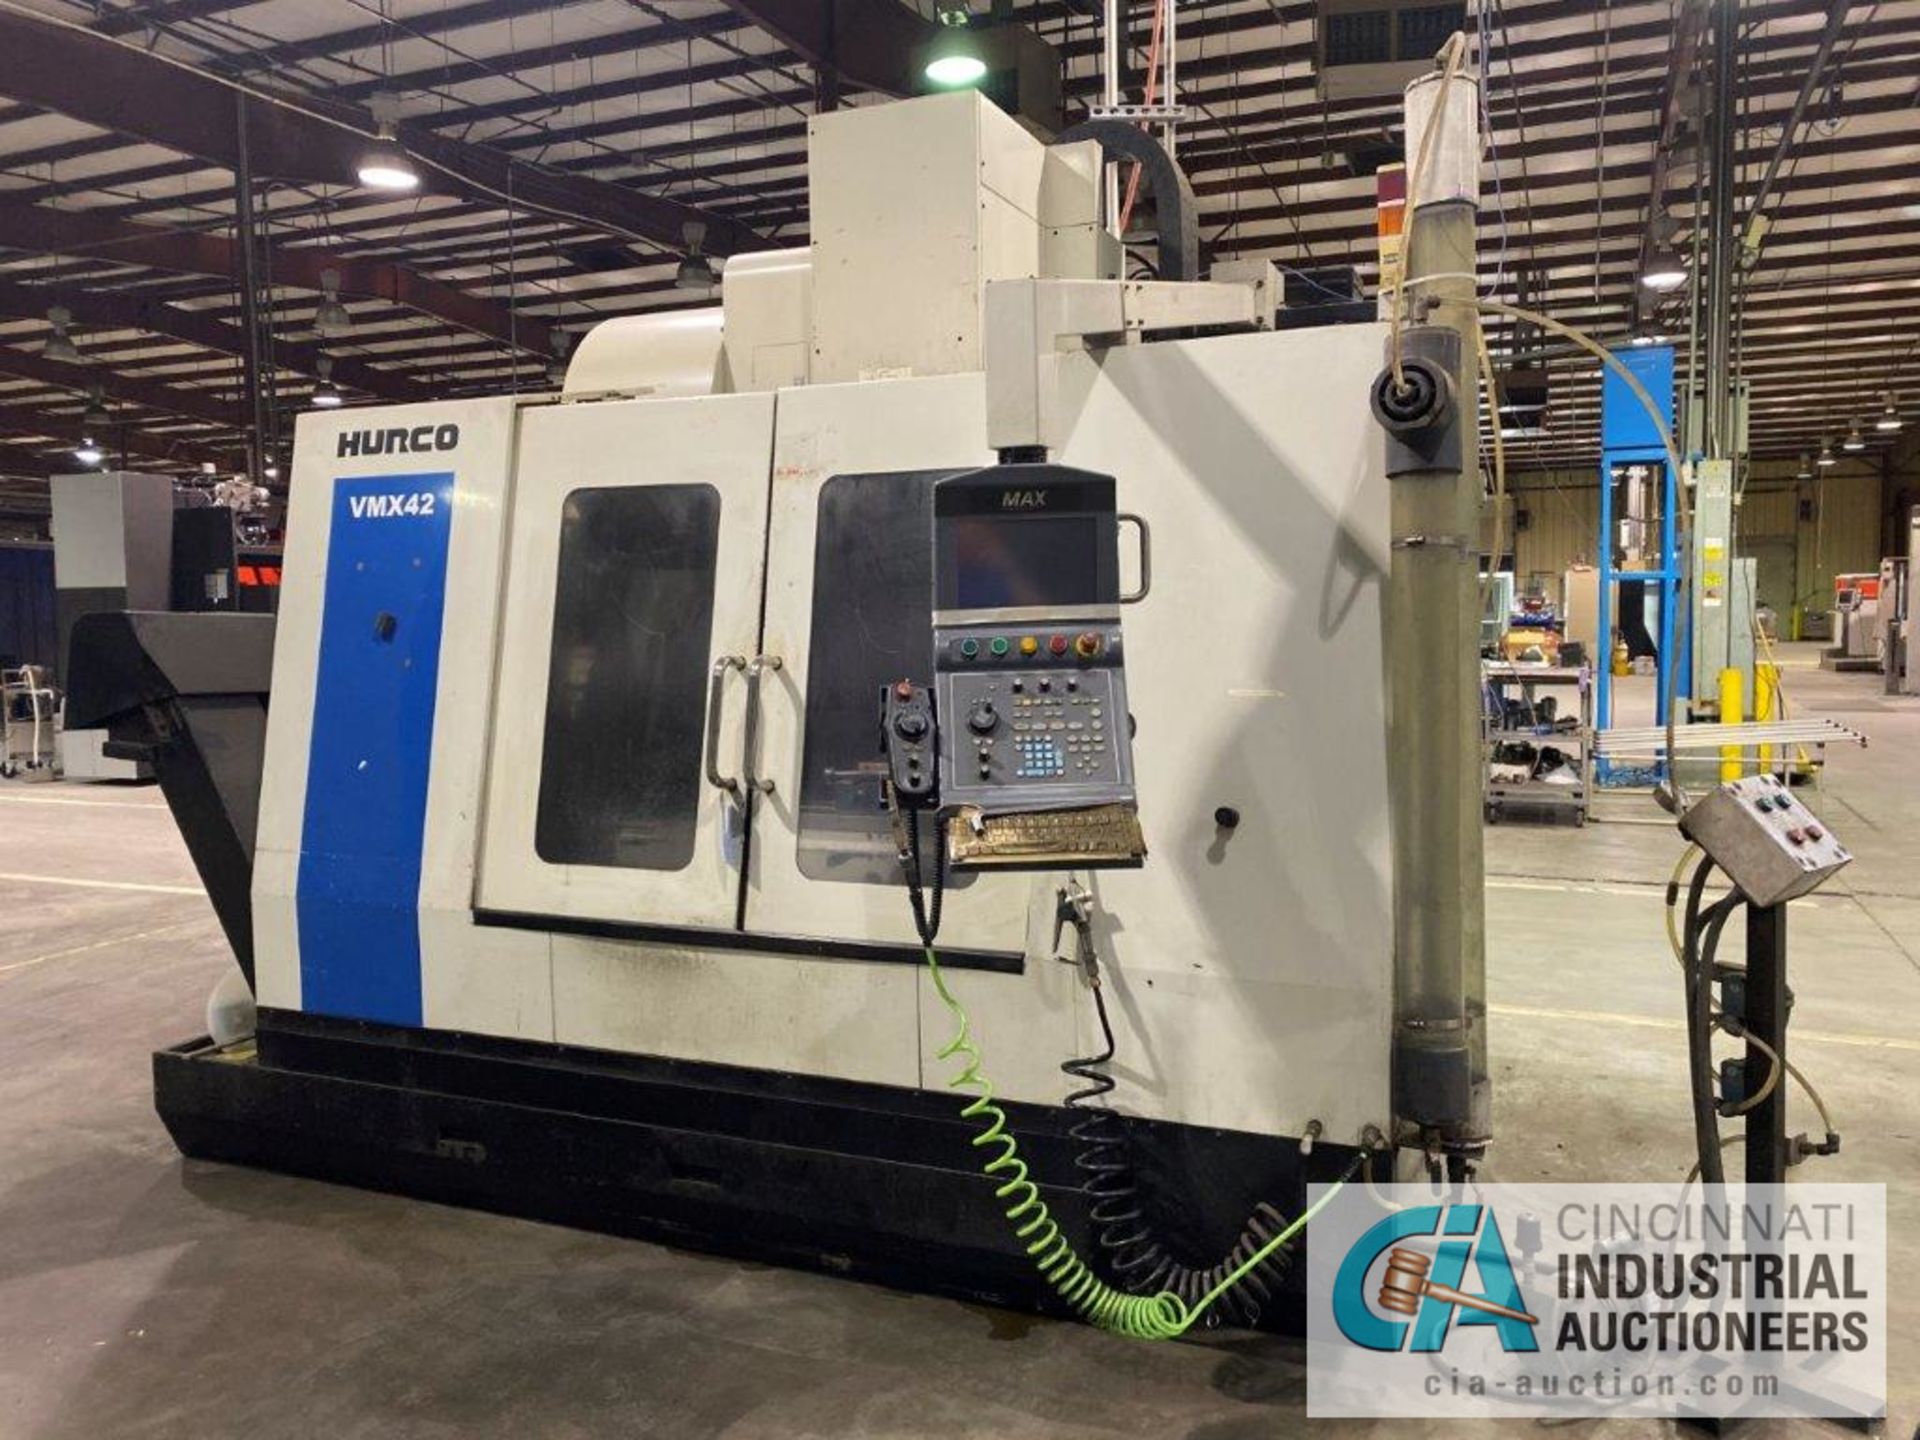 Late Addition of Hurco VMX42 CNC VMC - See Lot 212A for More Info